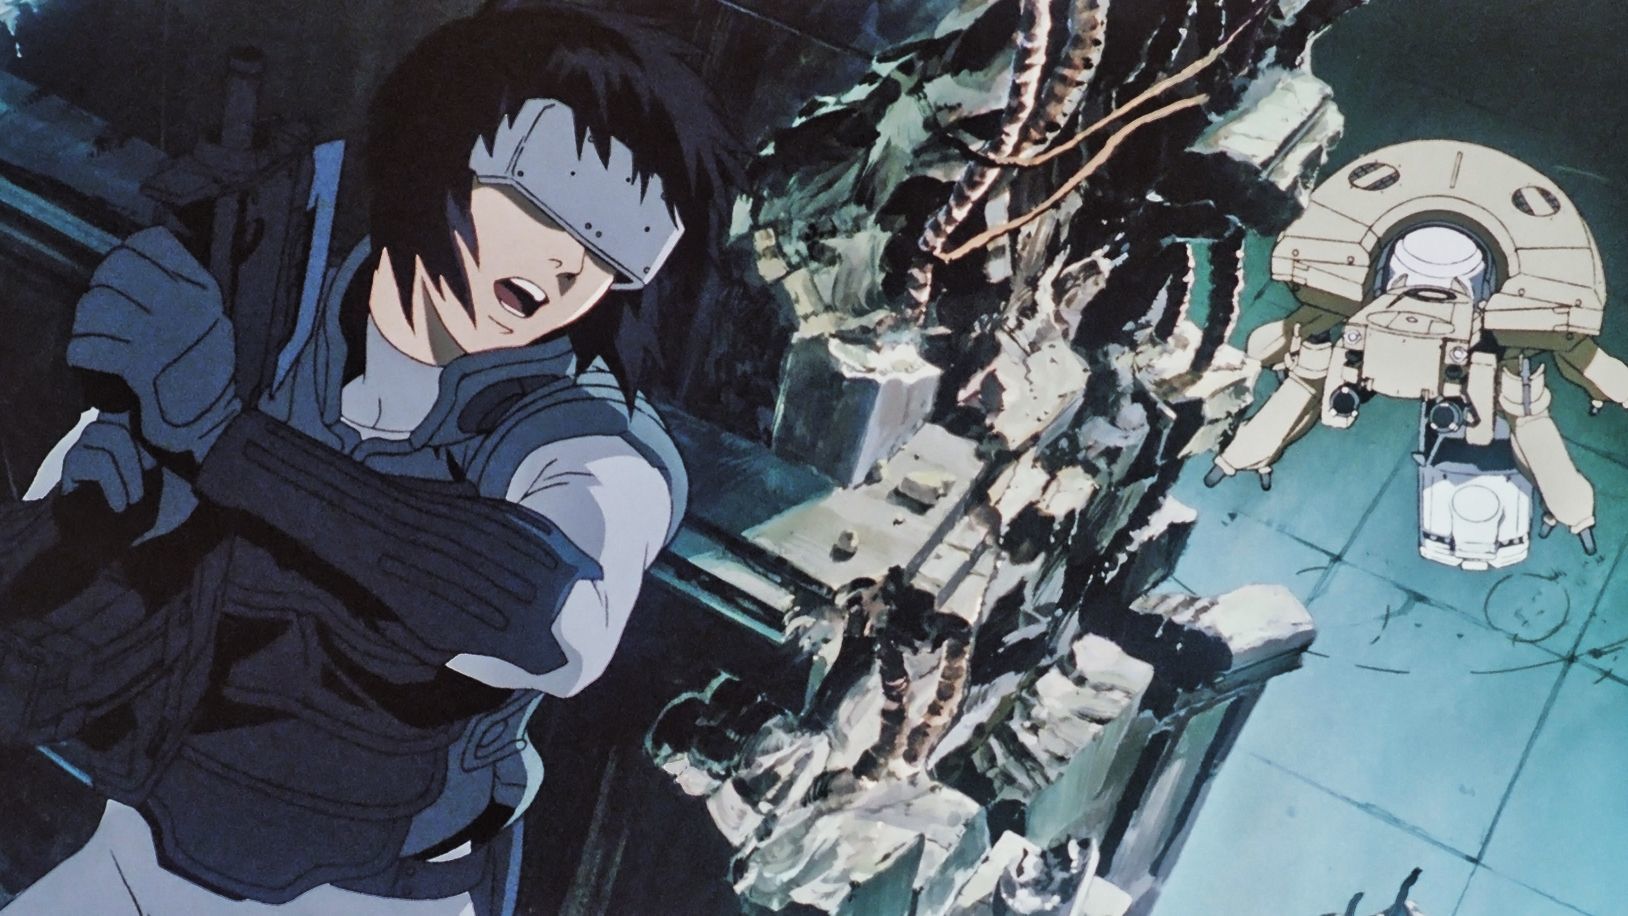 Anime Classic Ghost In The Shell Comes To 4K Ultra HD - GameSpot